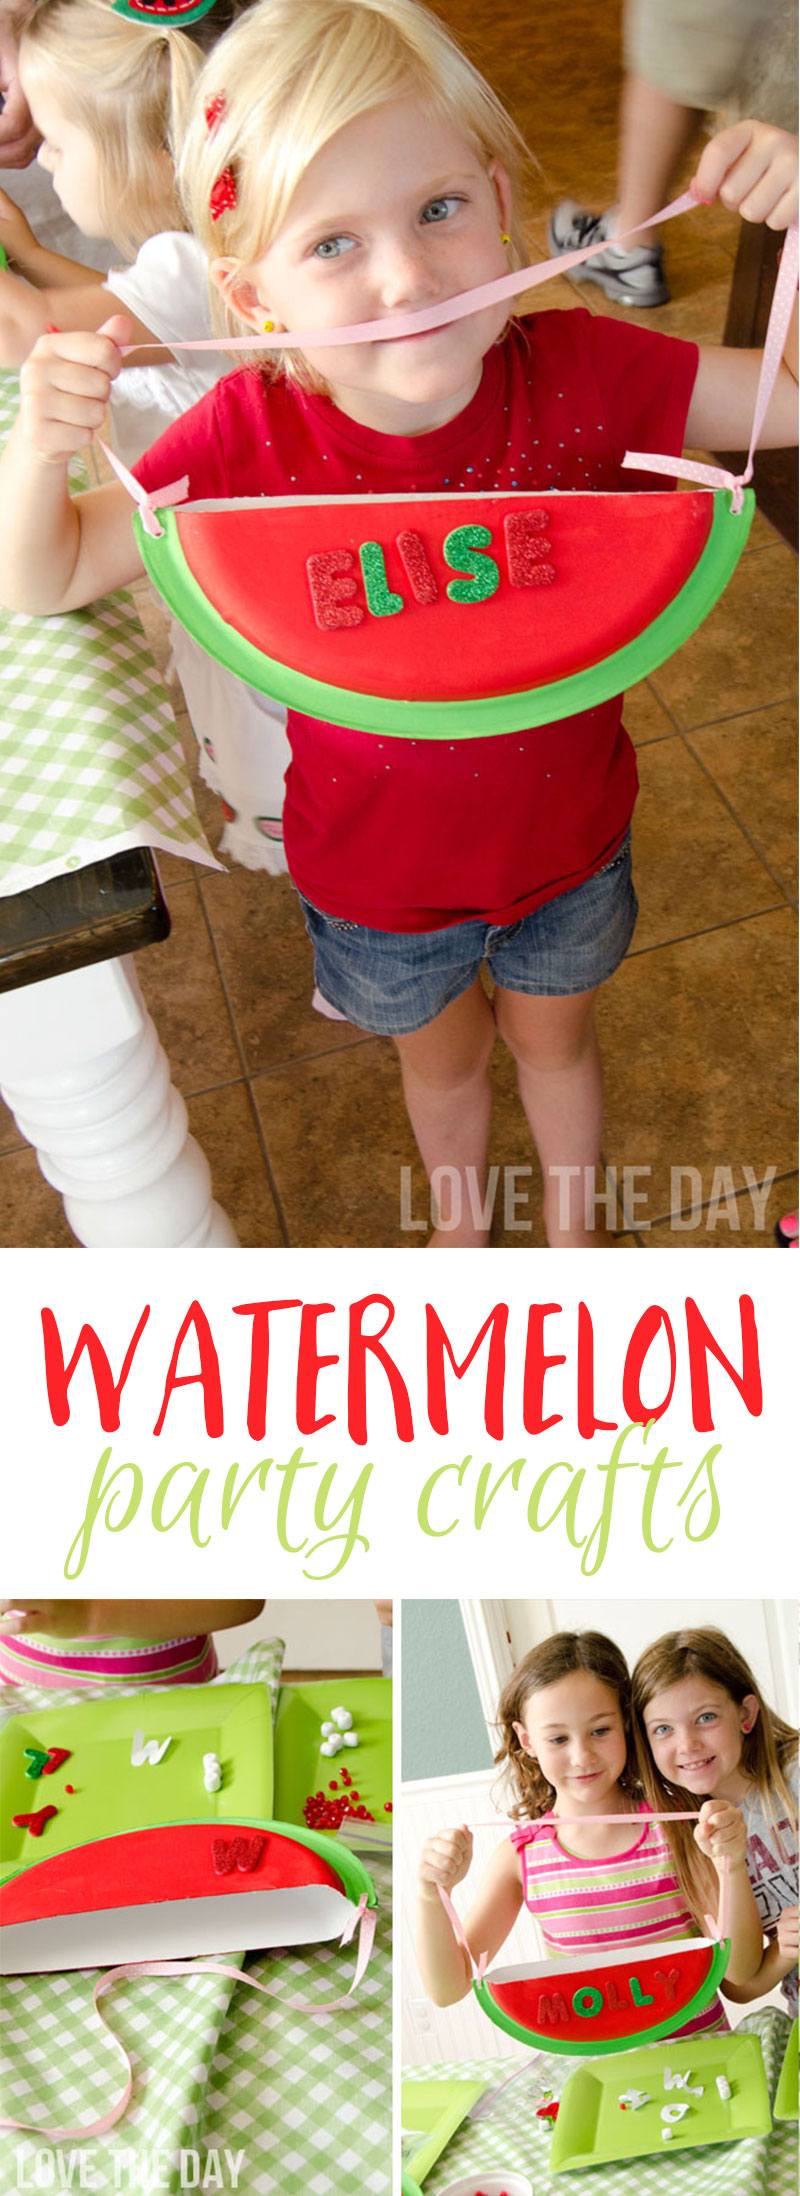 Watermelon Party Activities by Lindi Haws of Love The Day